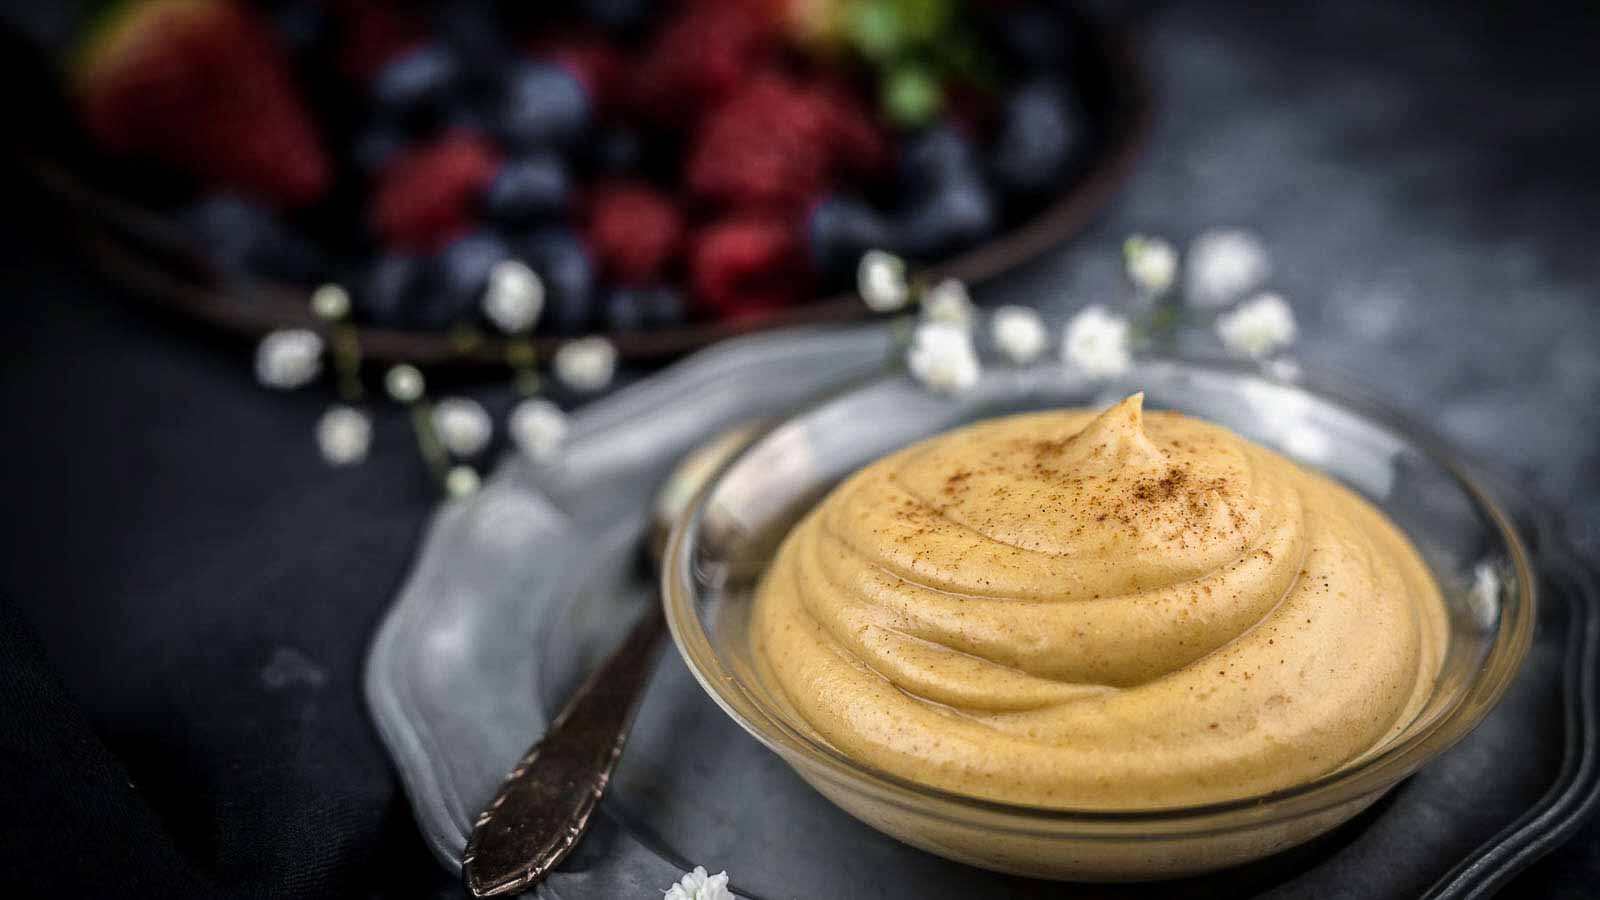 Peanut Butter Mousse iniside glass bowl.